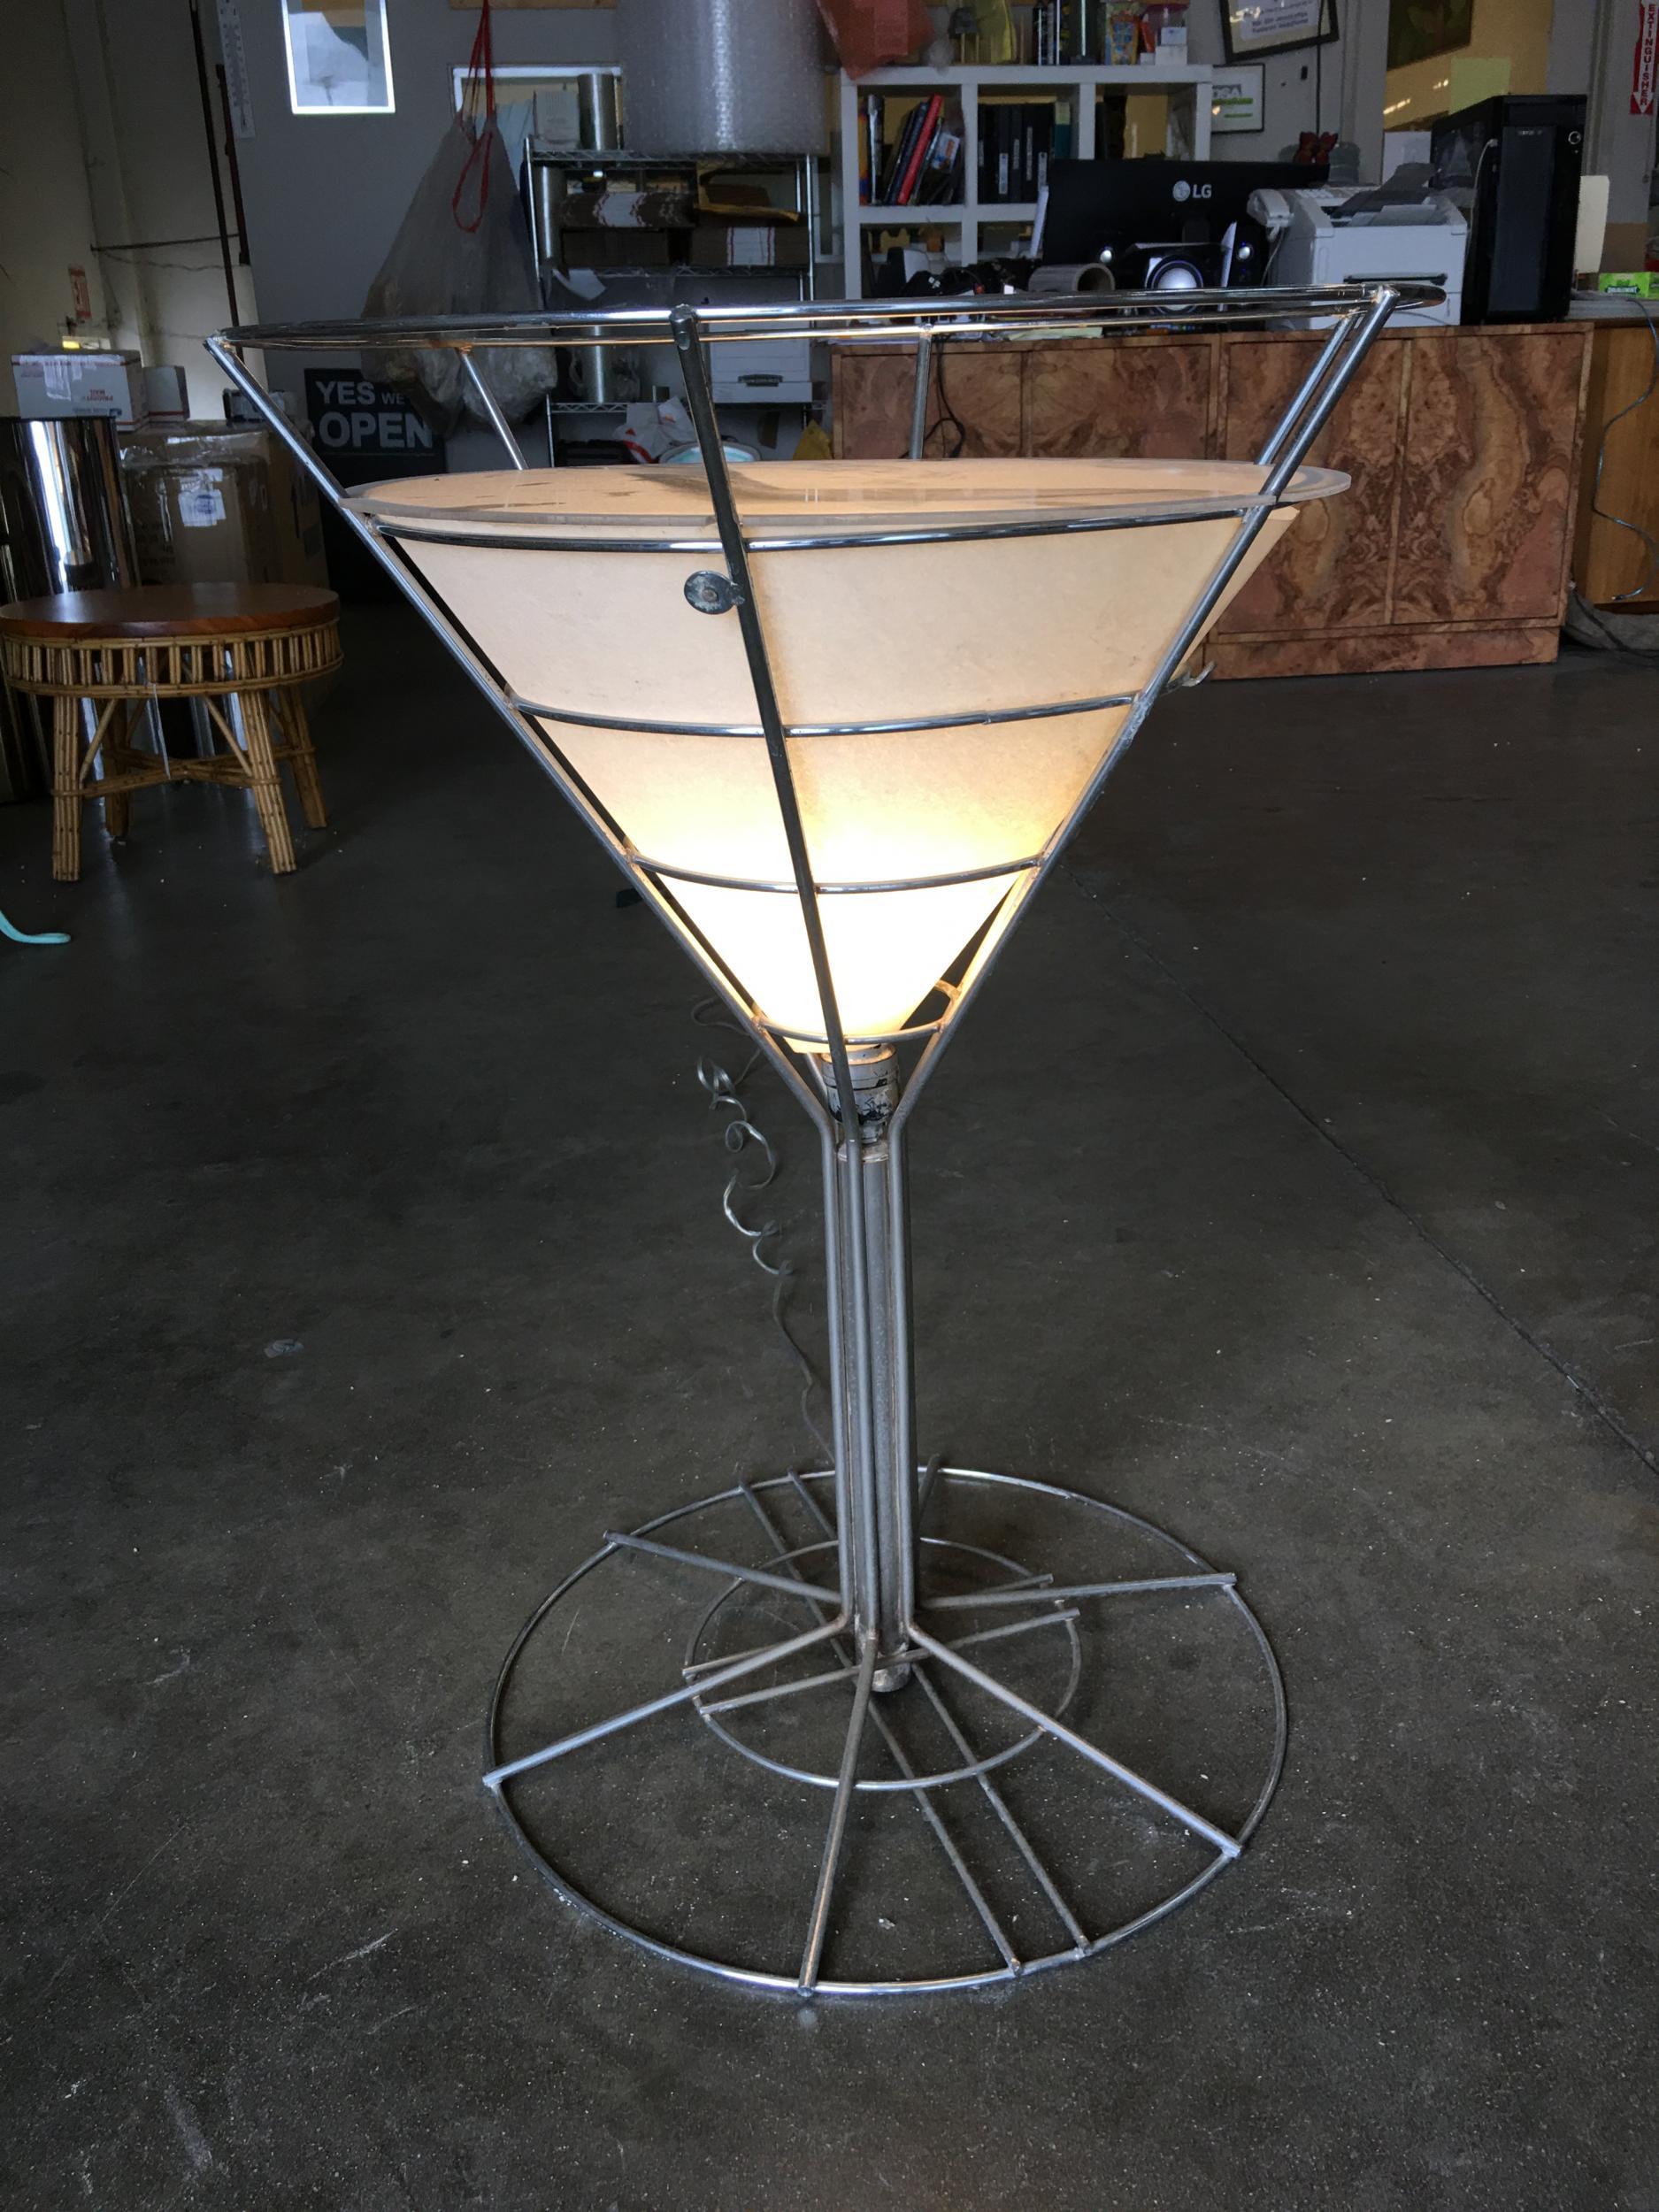 Vintage chrome wire art light up Martini lounge side table featuring a single bulb which illuminates a white surrounding paper shade and glass top. Perfect for the lounge in your home.

Available- 2 